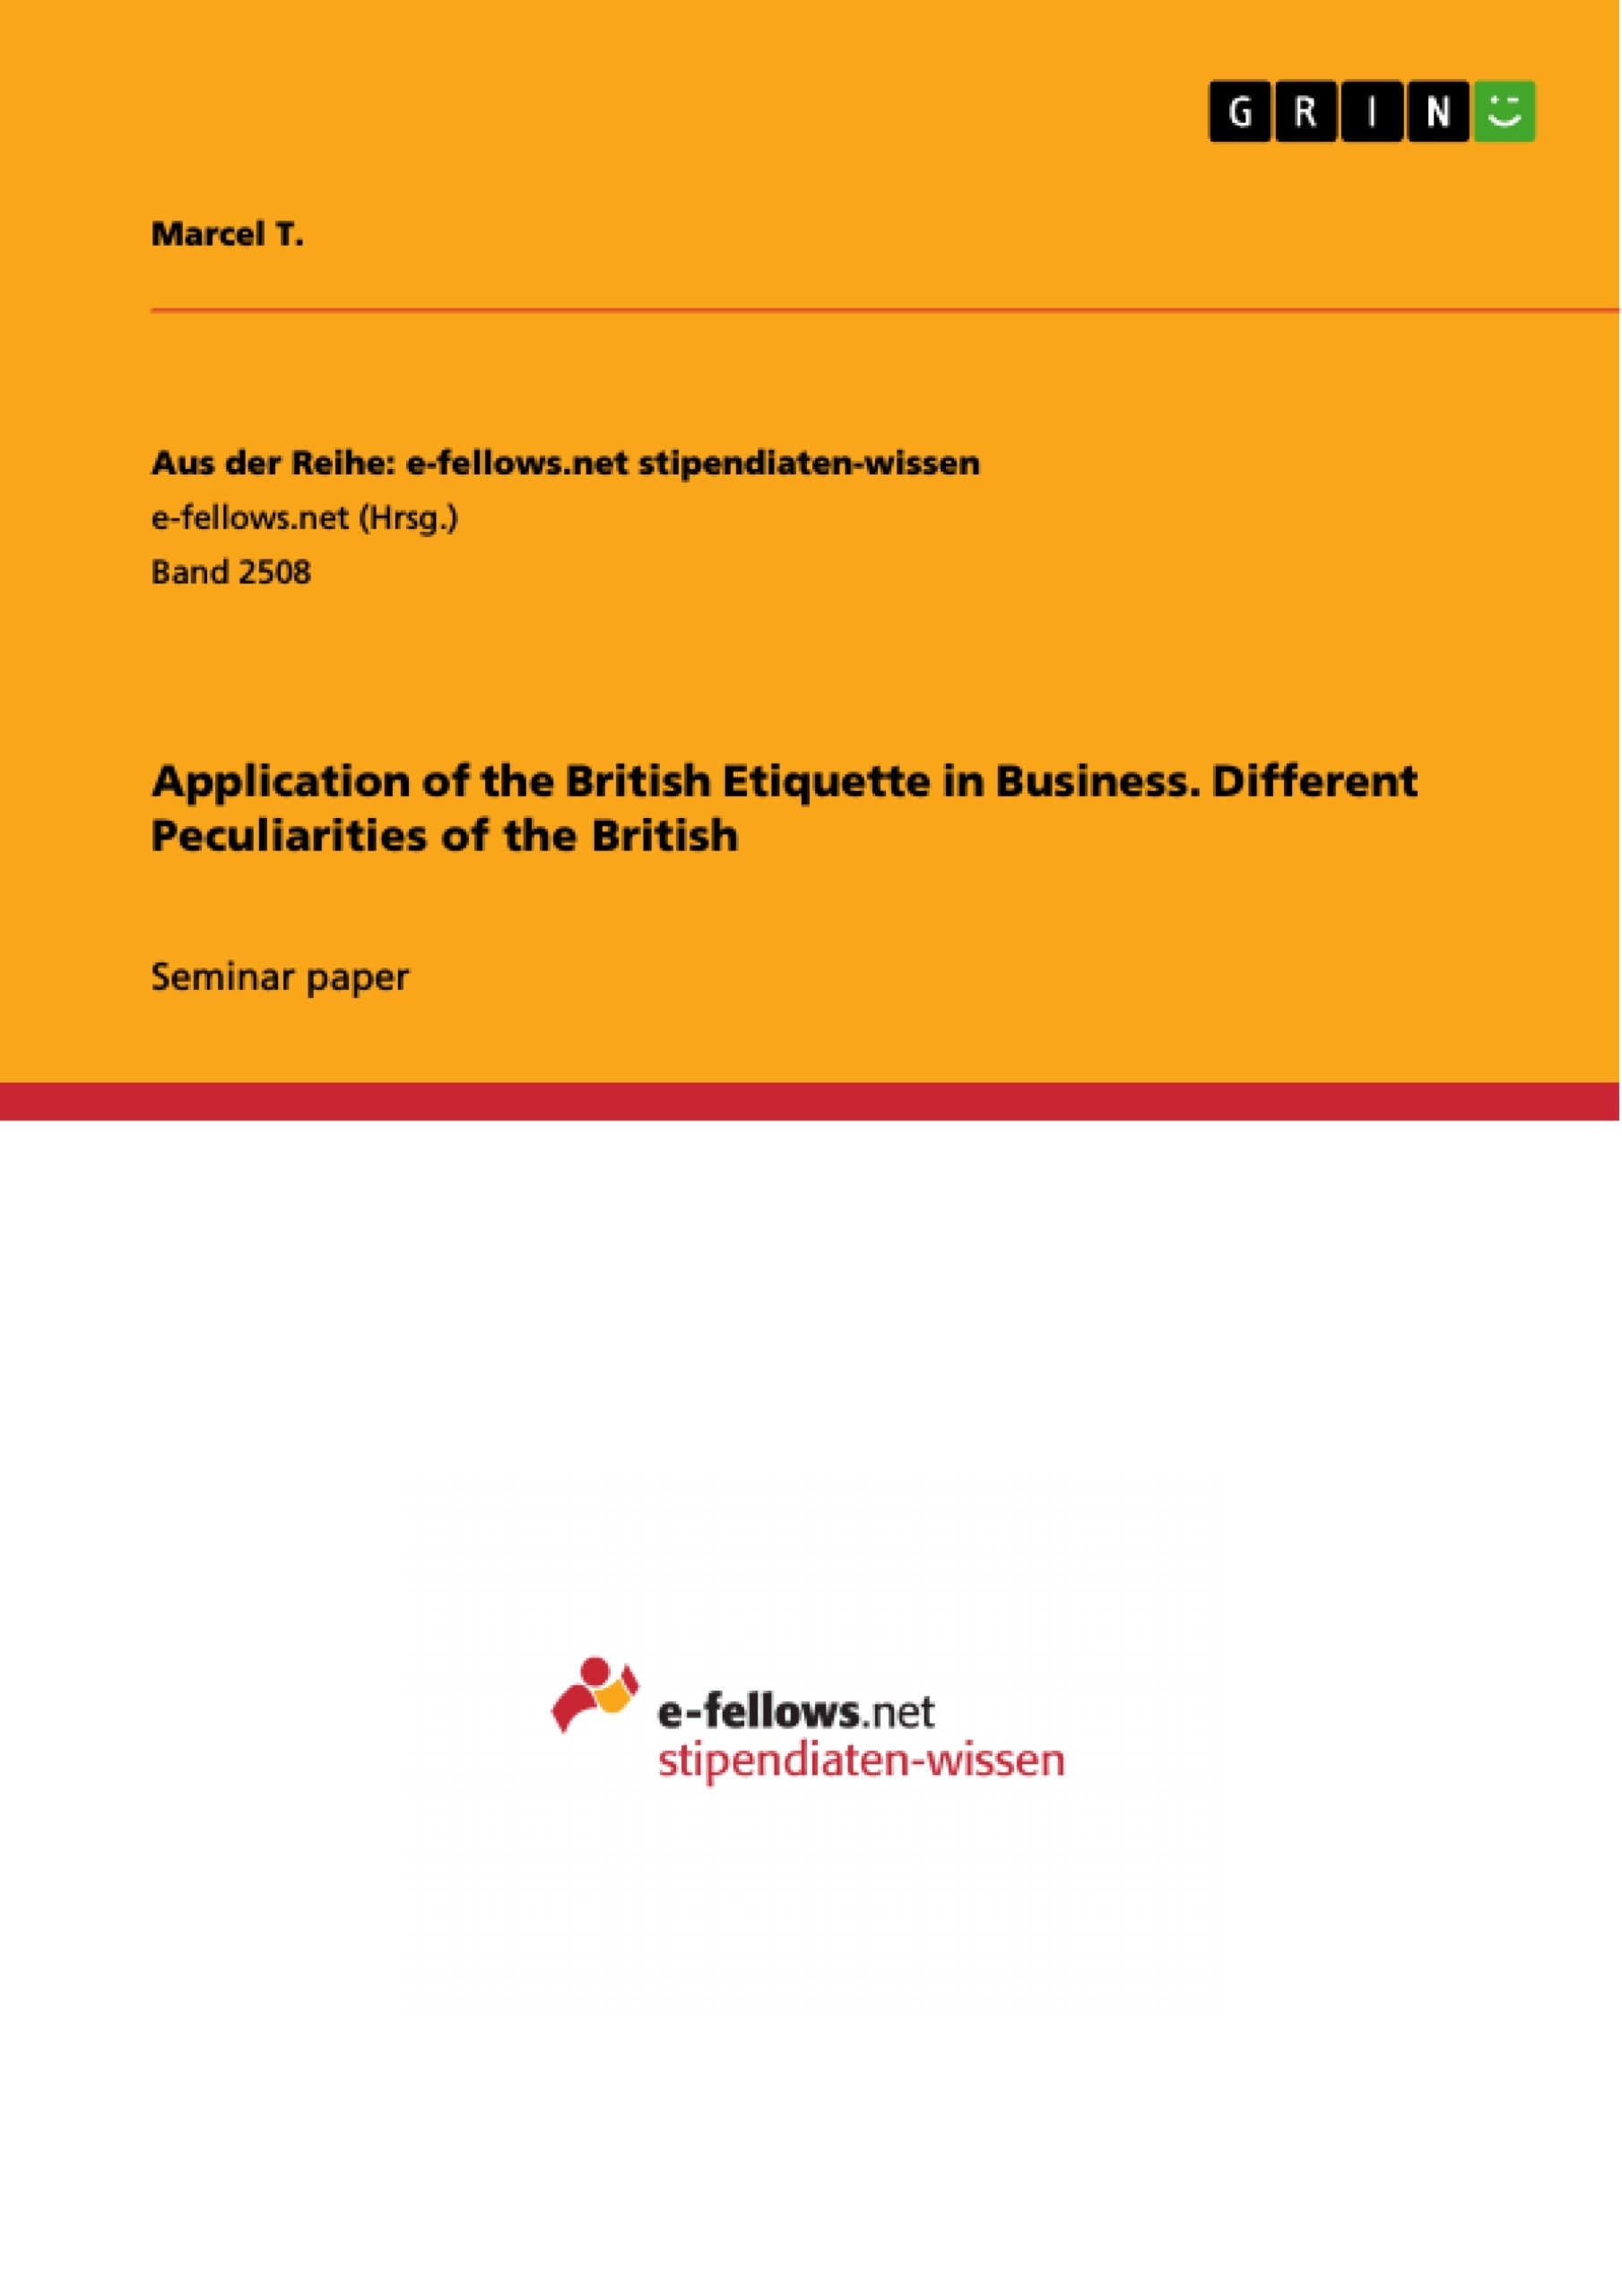 Title: Application of the British Etiquette in Business. Different Peculiarities of the British